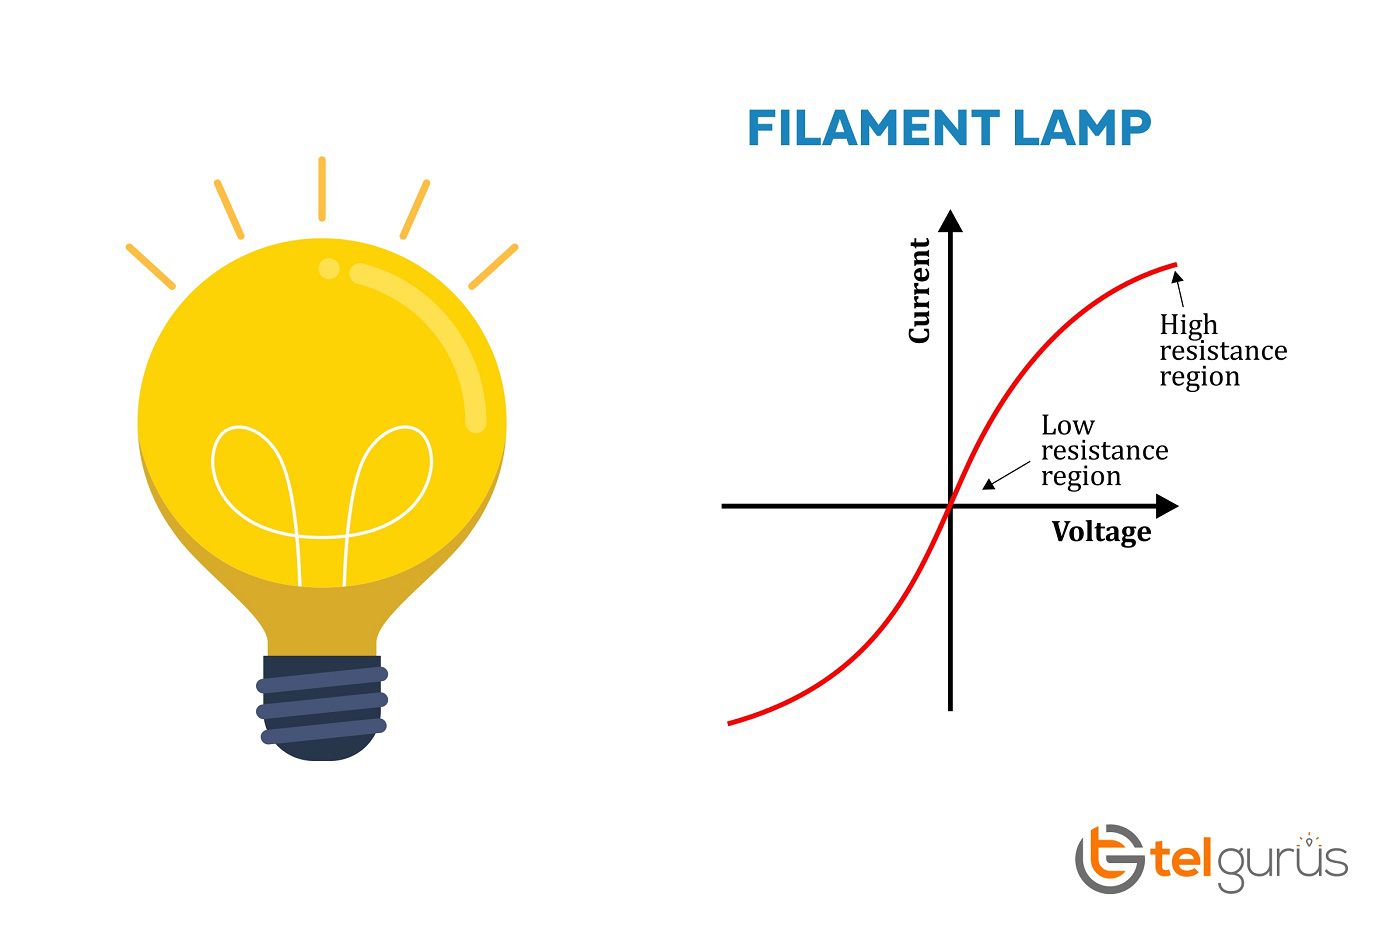 How does the resistance of a filament lamp change as the voltage increases?